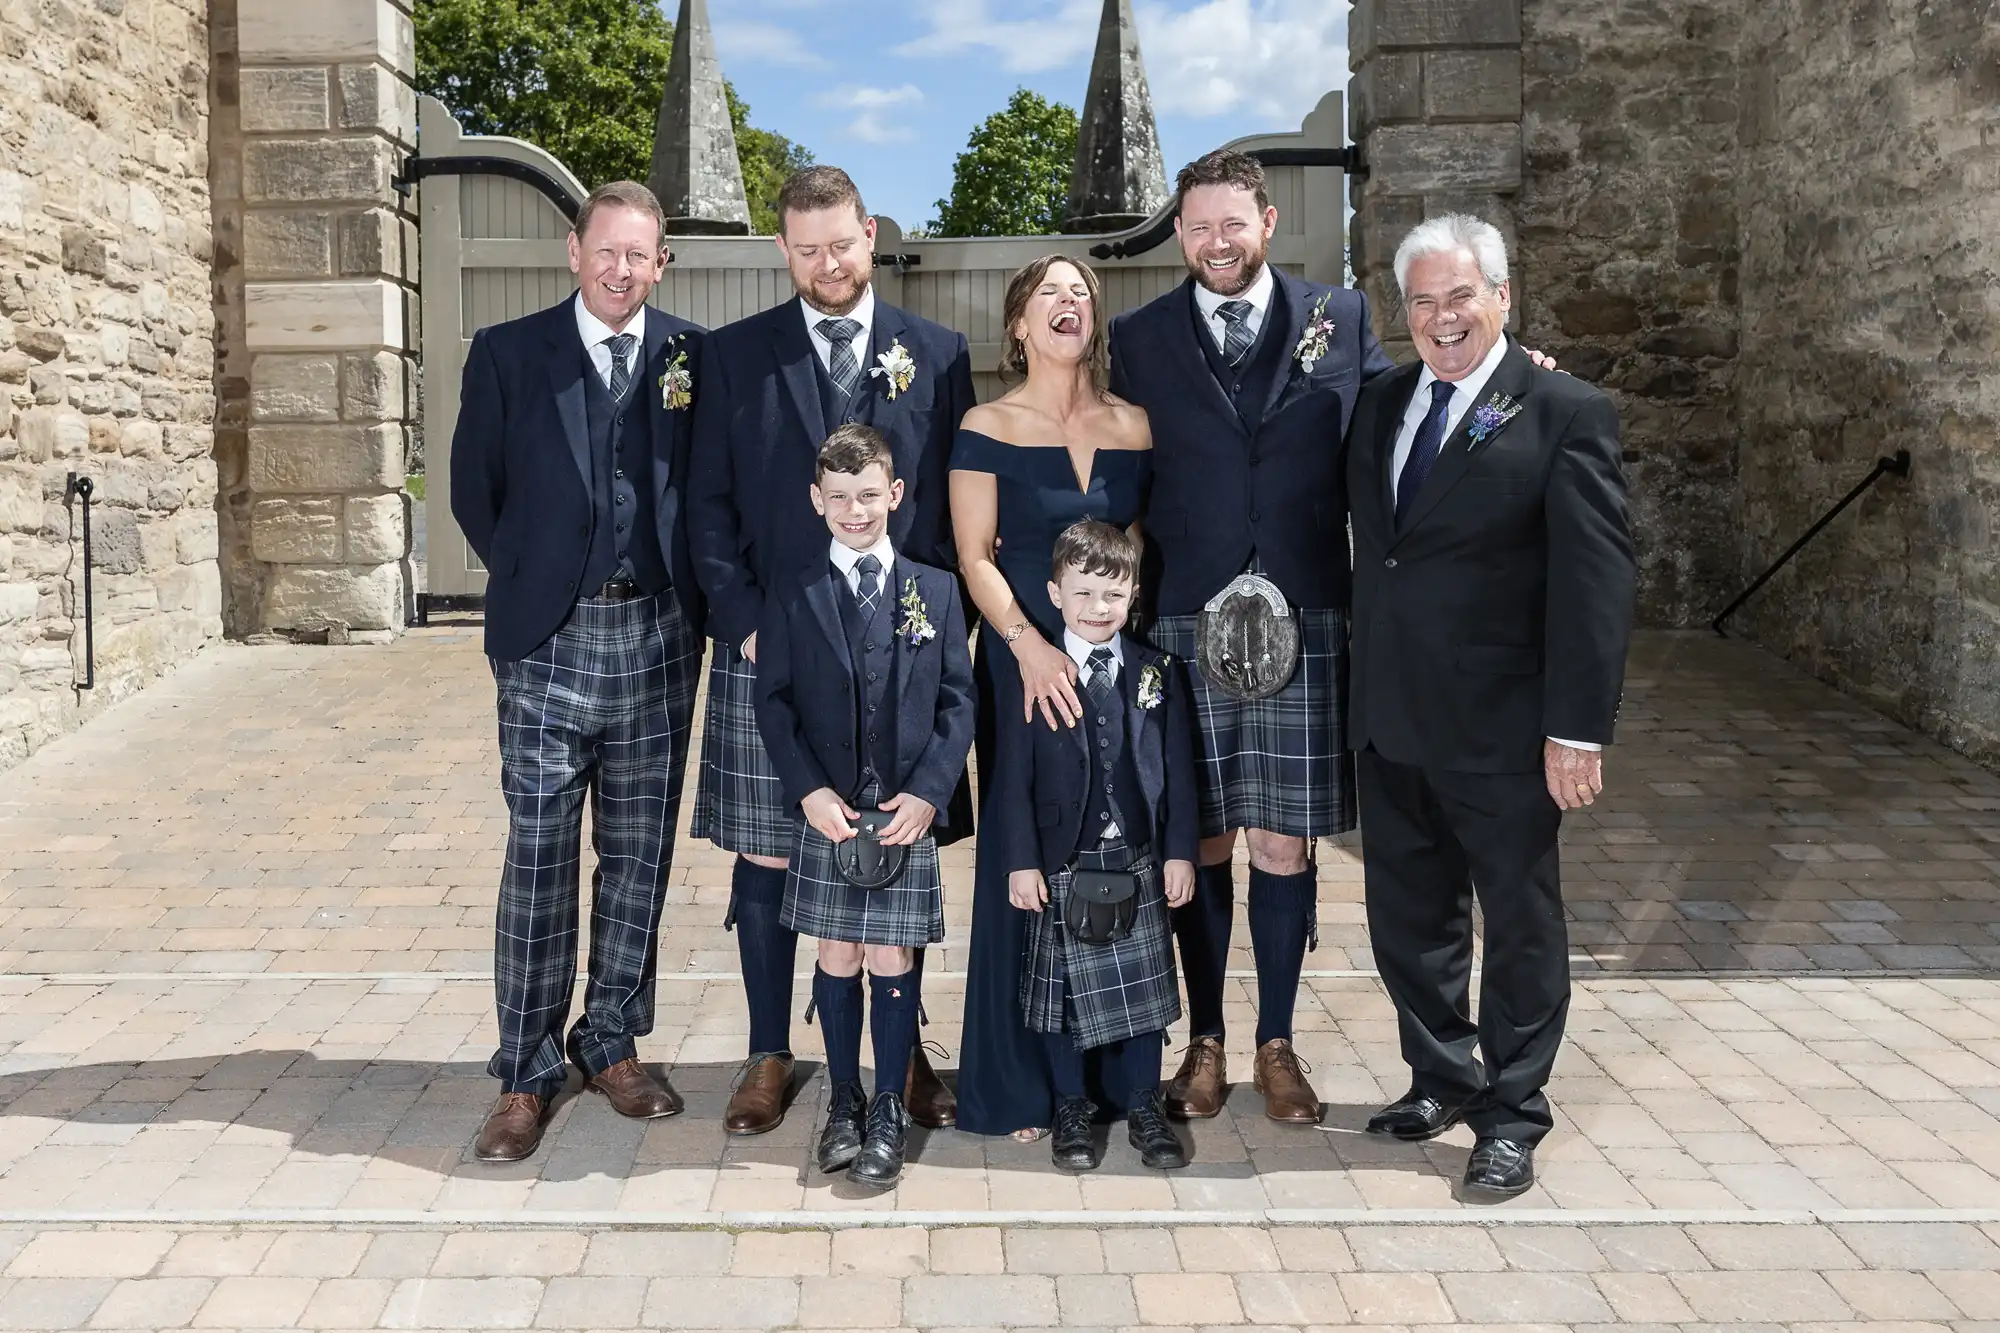 Group of six men and one woman in formal attire posing joyfully outside, with three children in front; all are wearing tartan kilts.